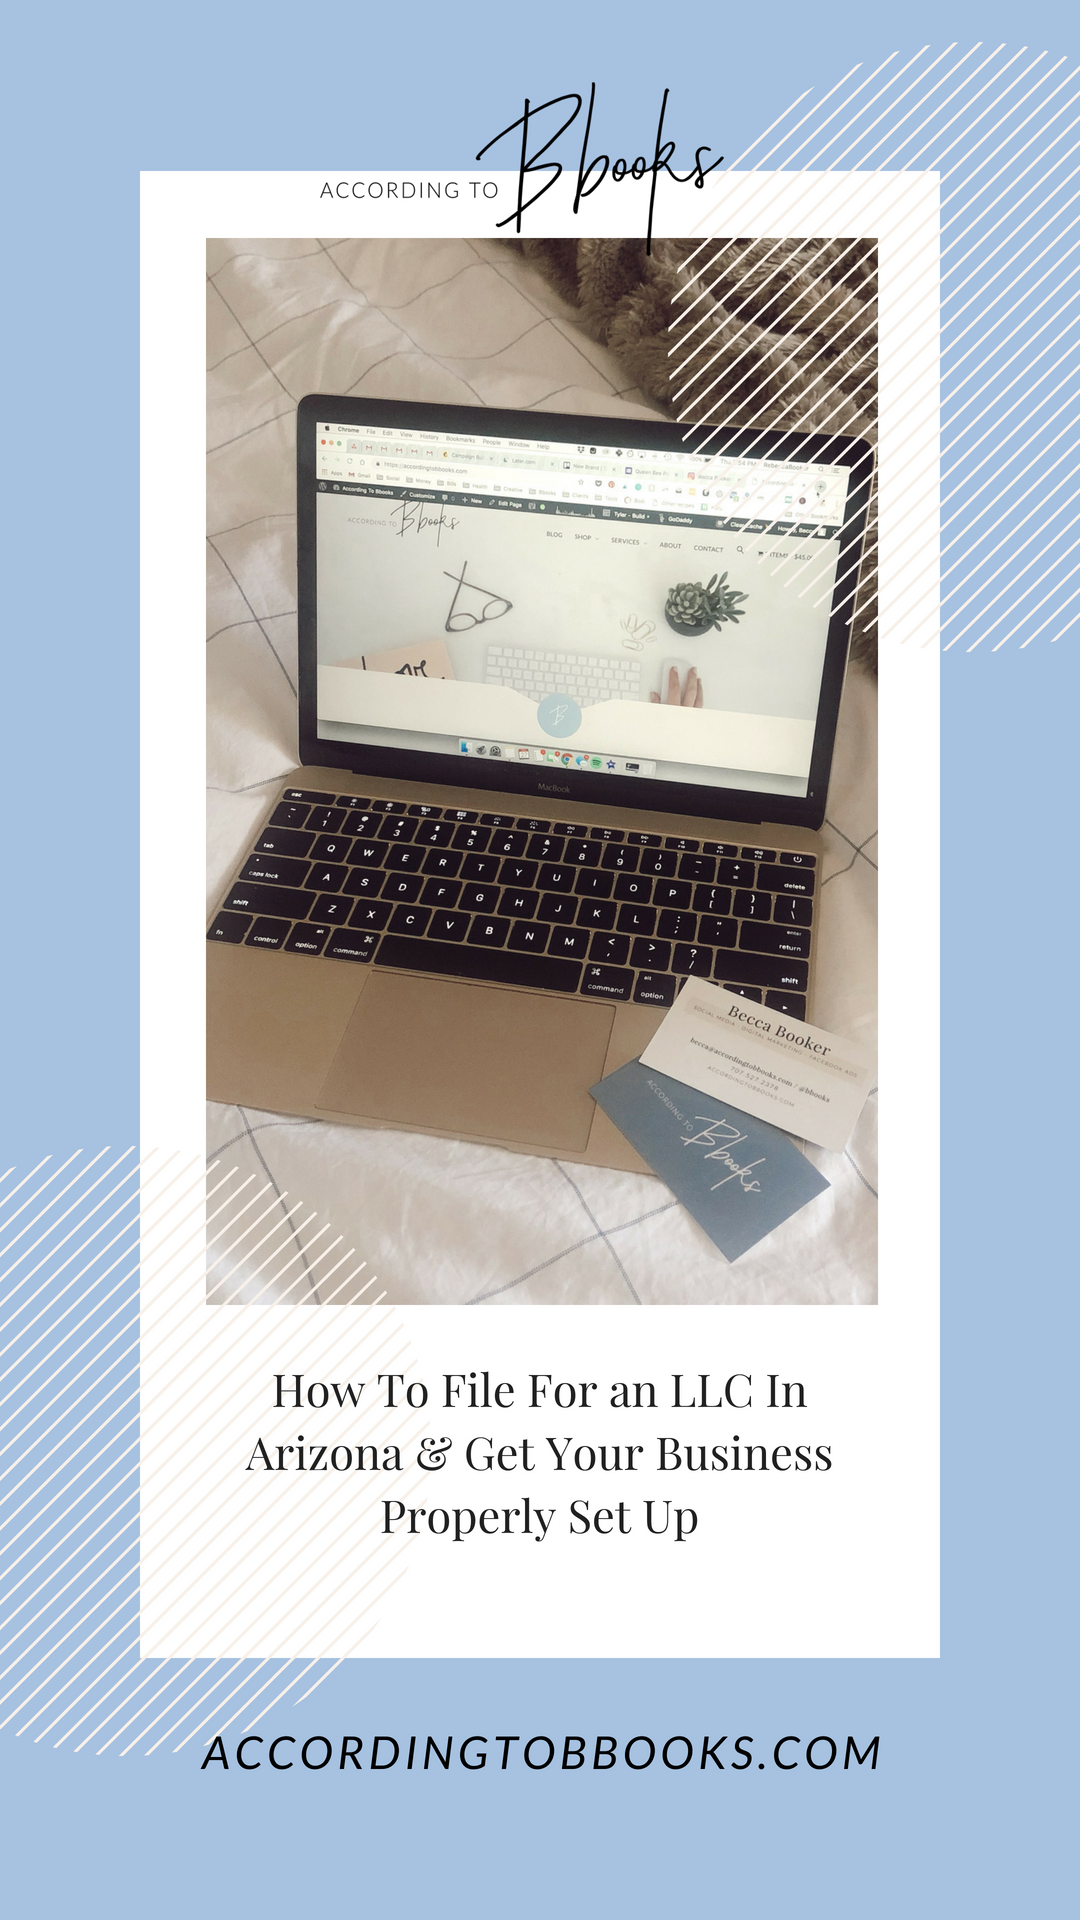 How To File For an LLC In Arizona & Get Your Business Properly Set Up